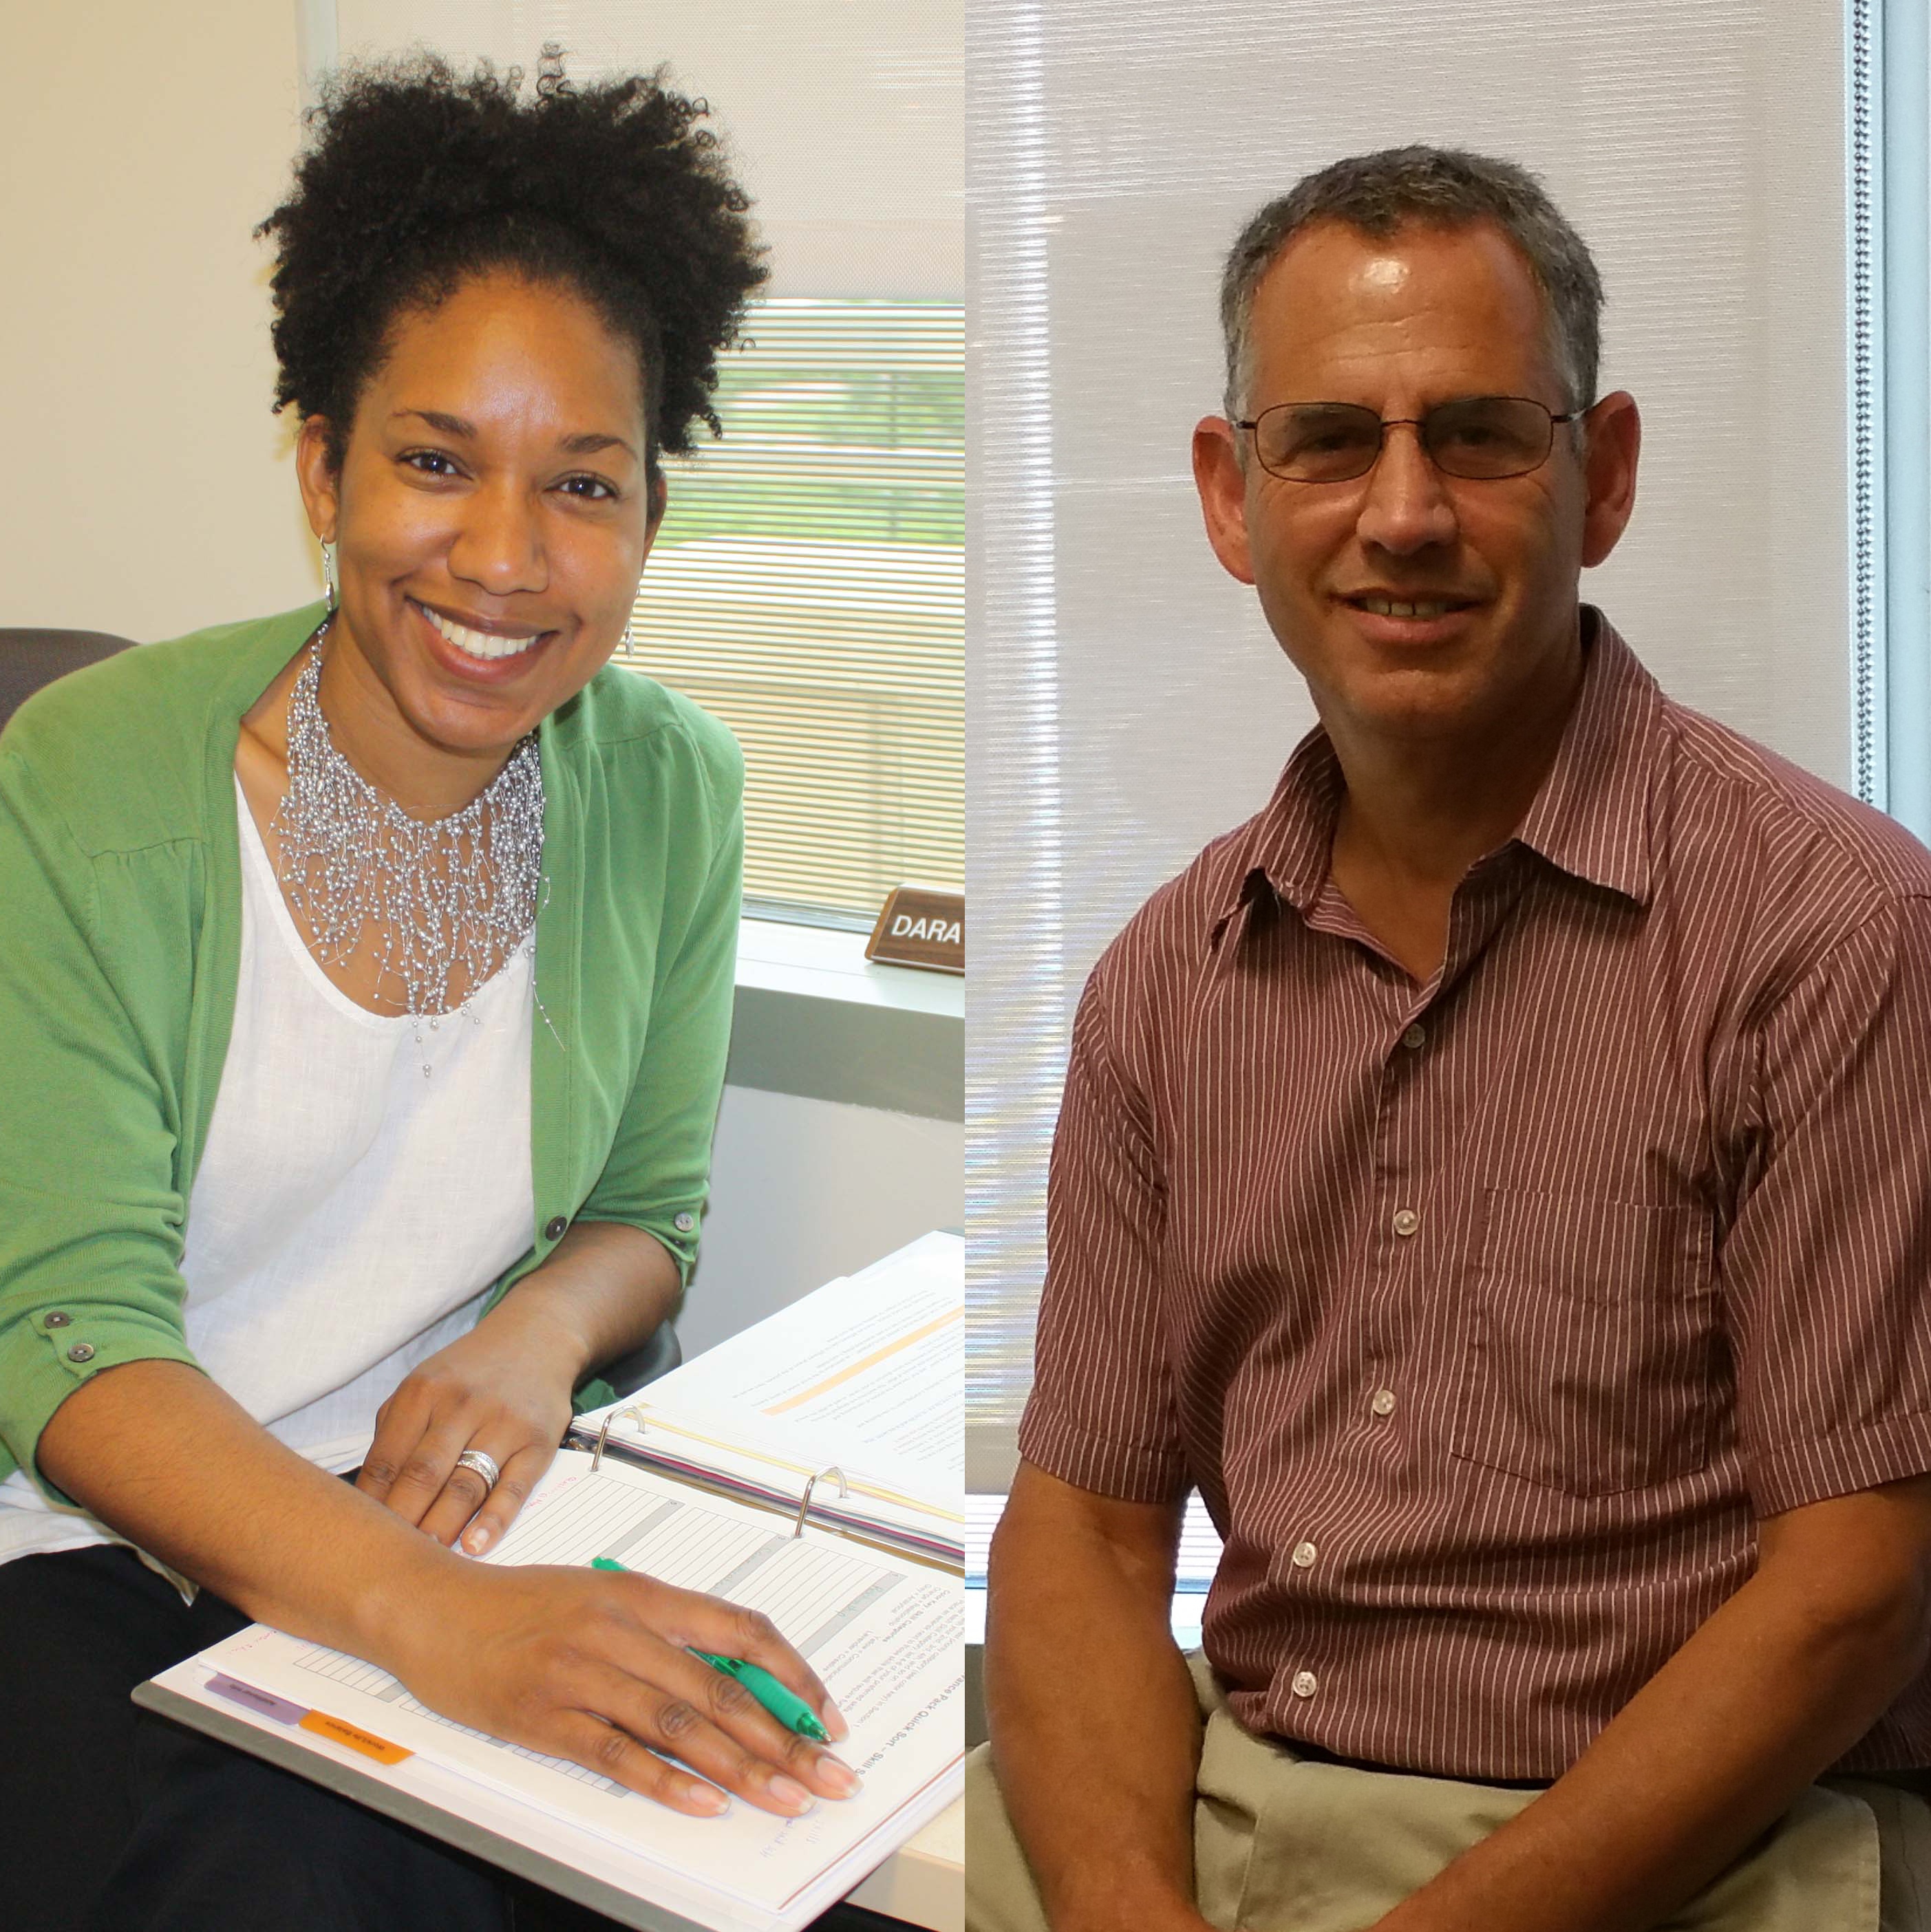 Photos: Portraits of counselors Dara Wilson-Grant and Alan Farber.